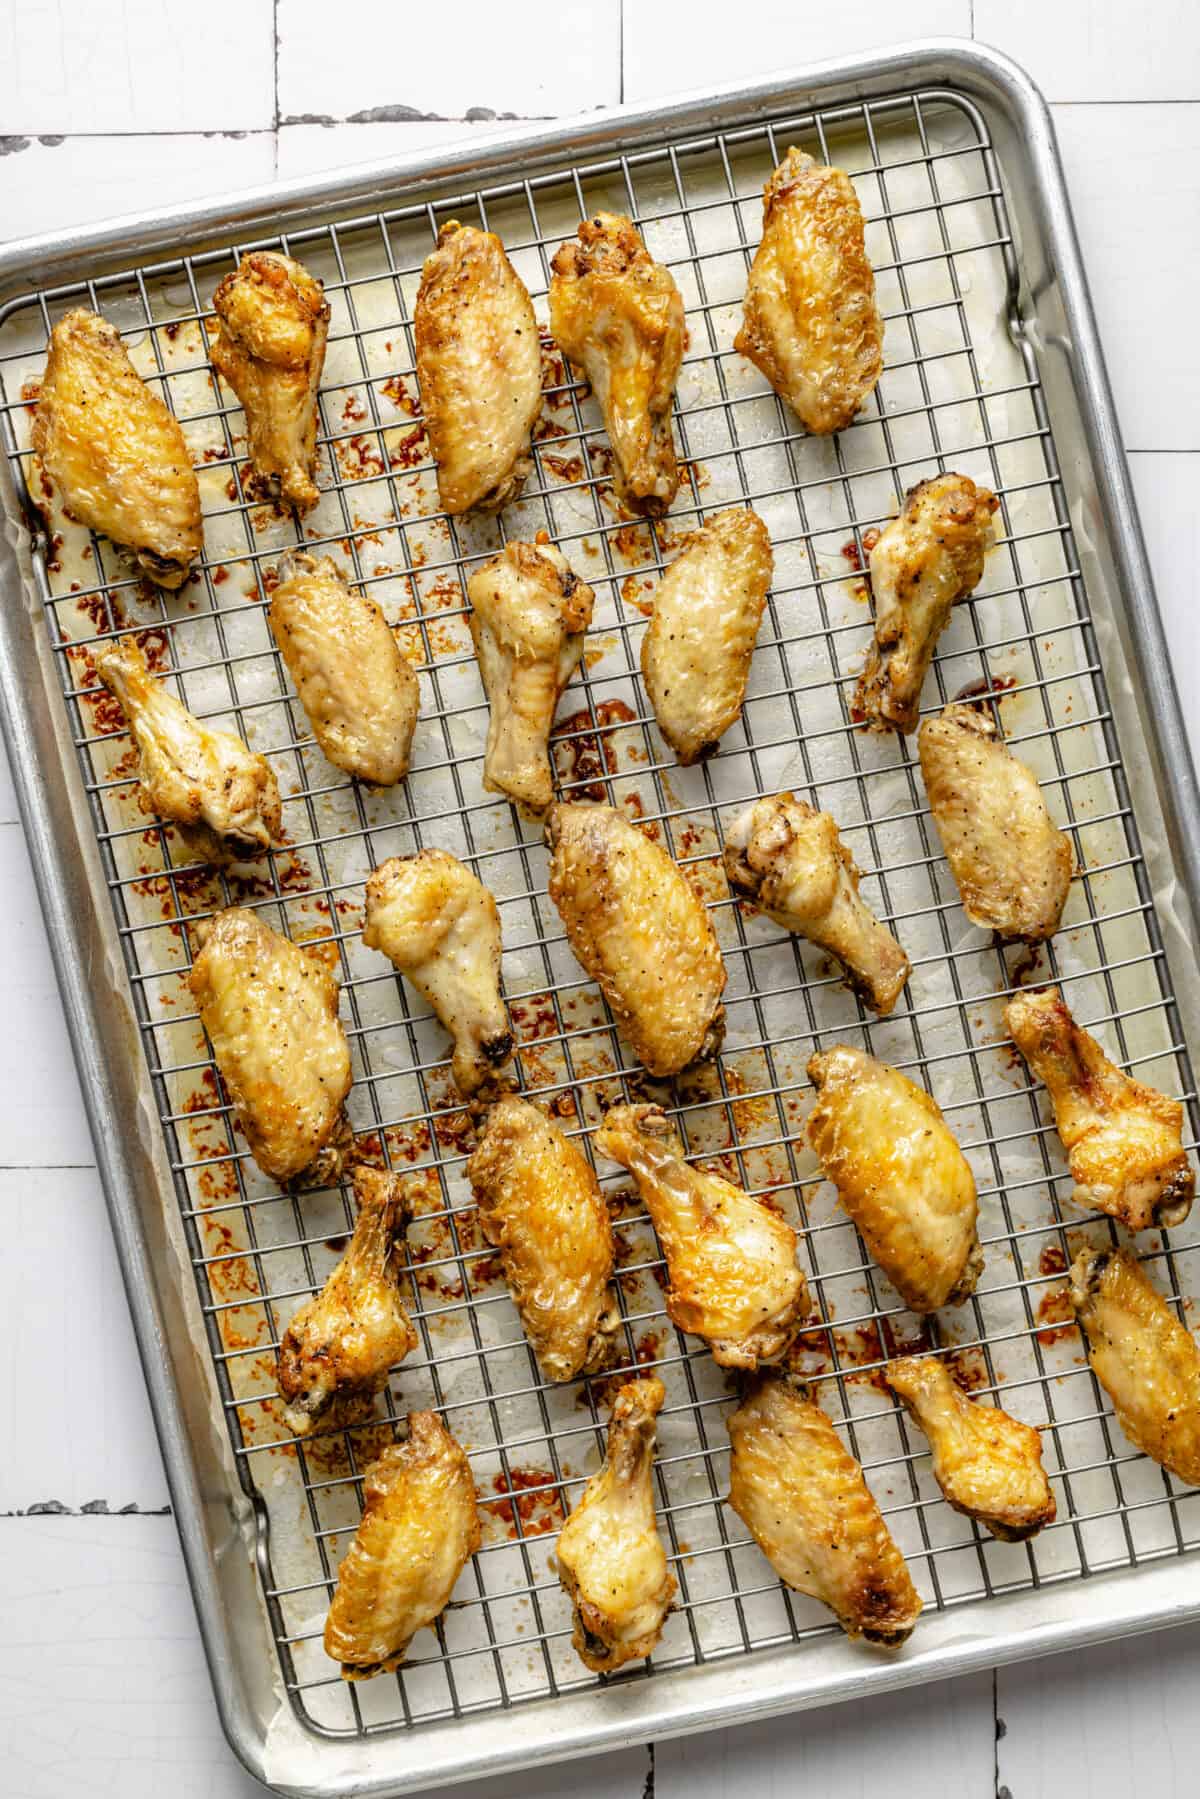 Crispy chicken wings on wire rack. Not coated in sauce yet.